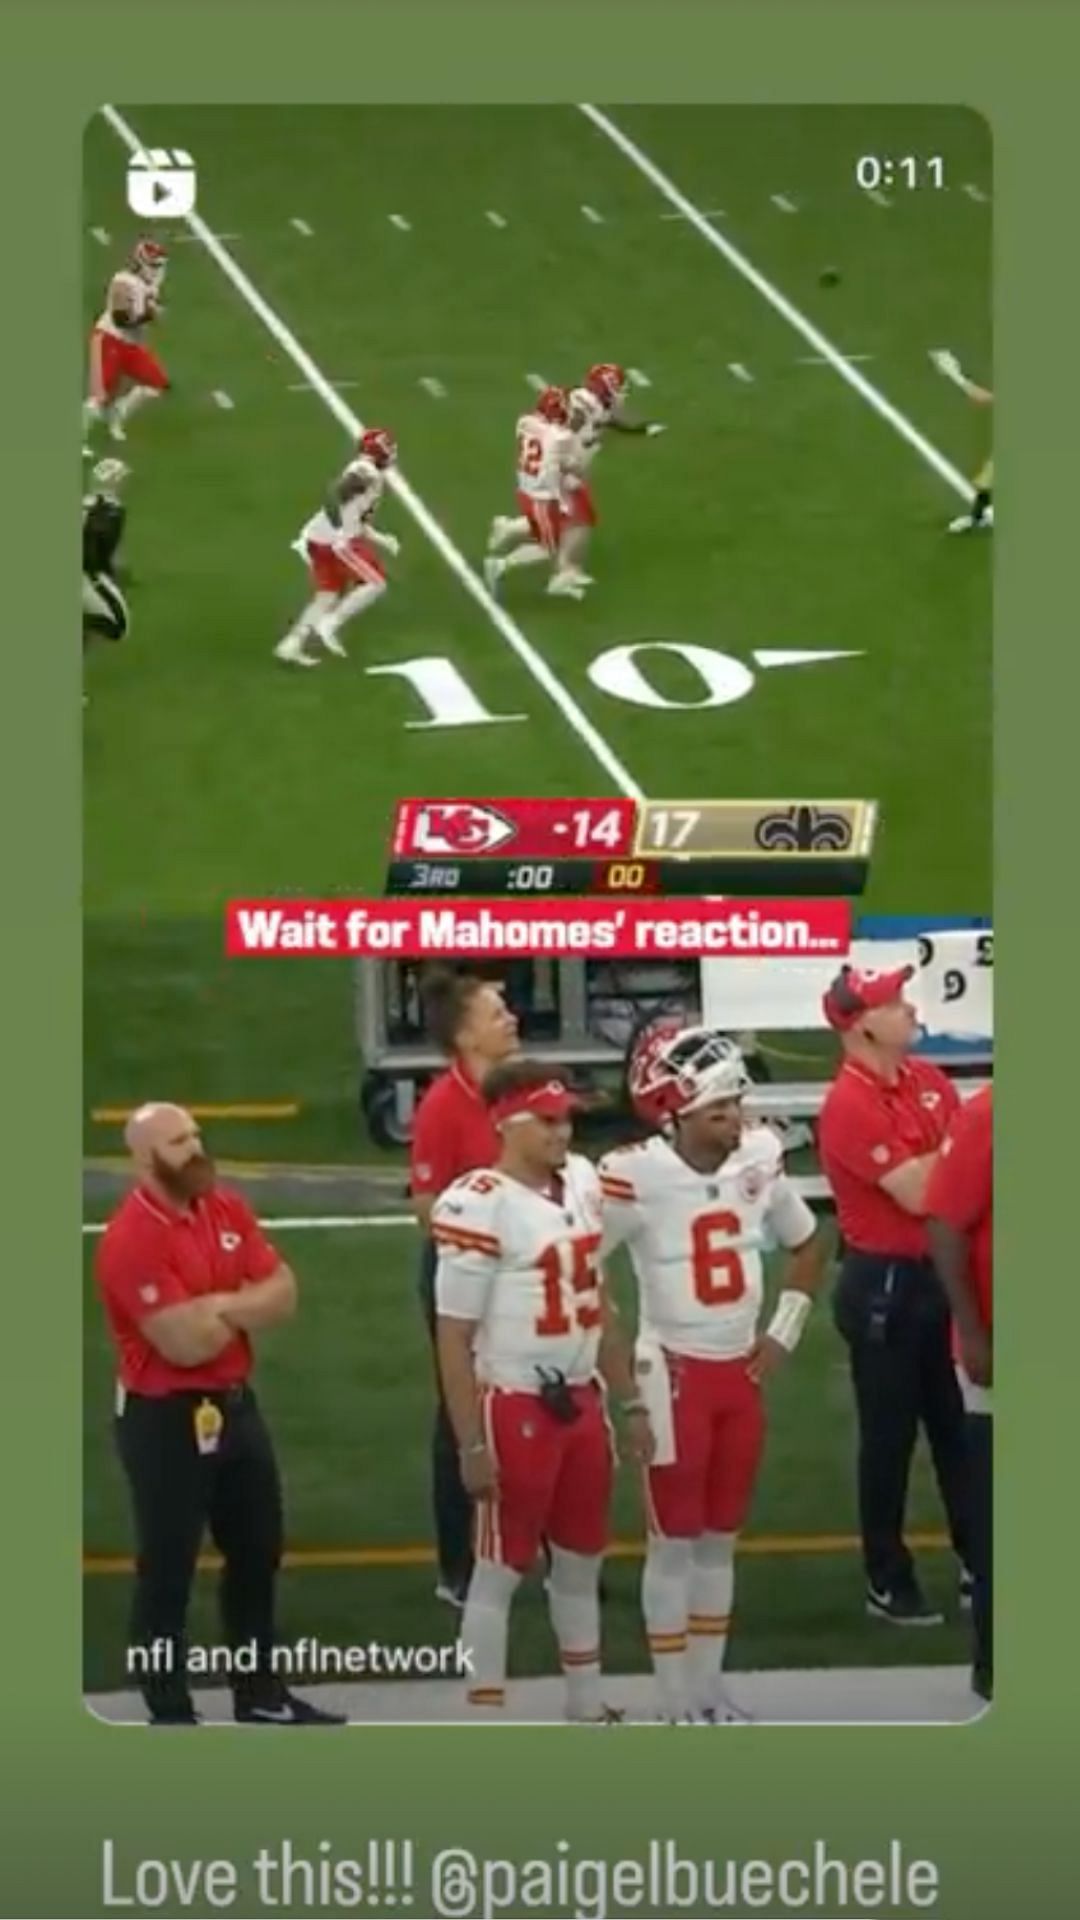 Brittany Mahomes&#039; reaction to the throw by Buechele. Credit: @brittanylynne (IG)